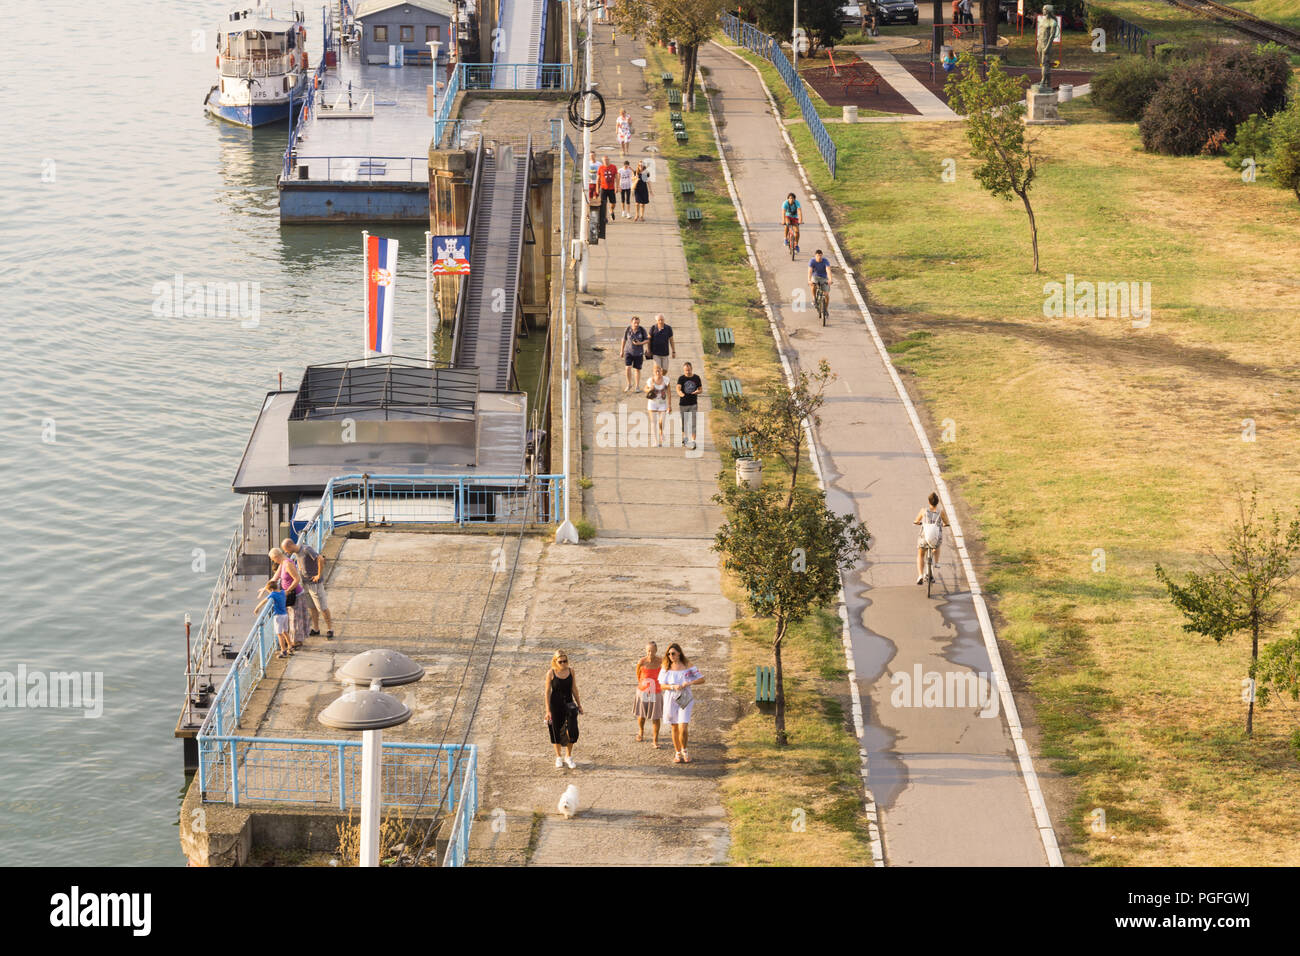 Belgrade bicycle path - Top view of people strolling and cycling along the Sava River waterfront in Belgrade, Serbia, Europe. Stock Photo